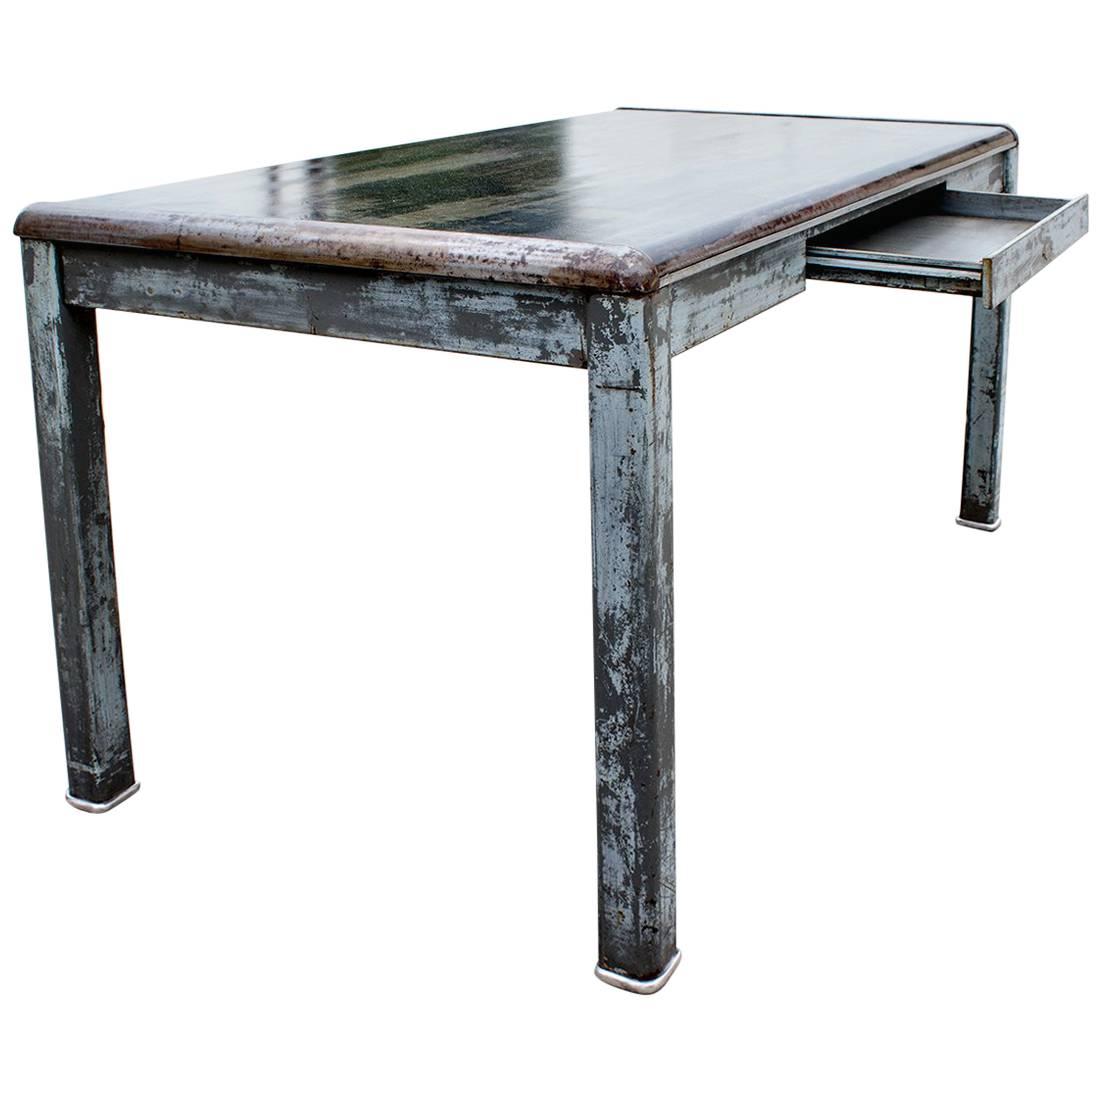 1940s Industrial Tanker Table by Art Metal, Refinished